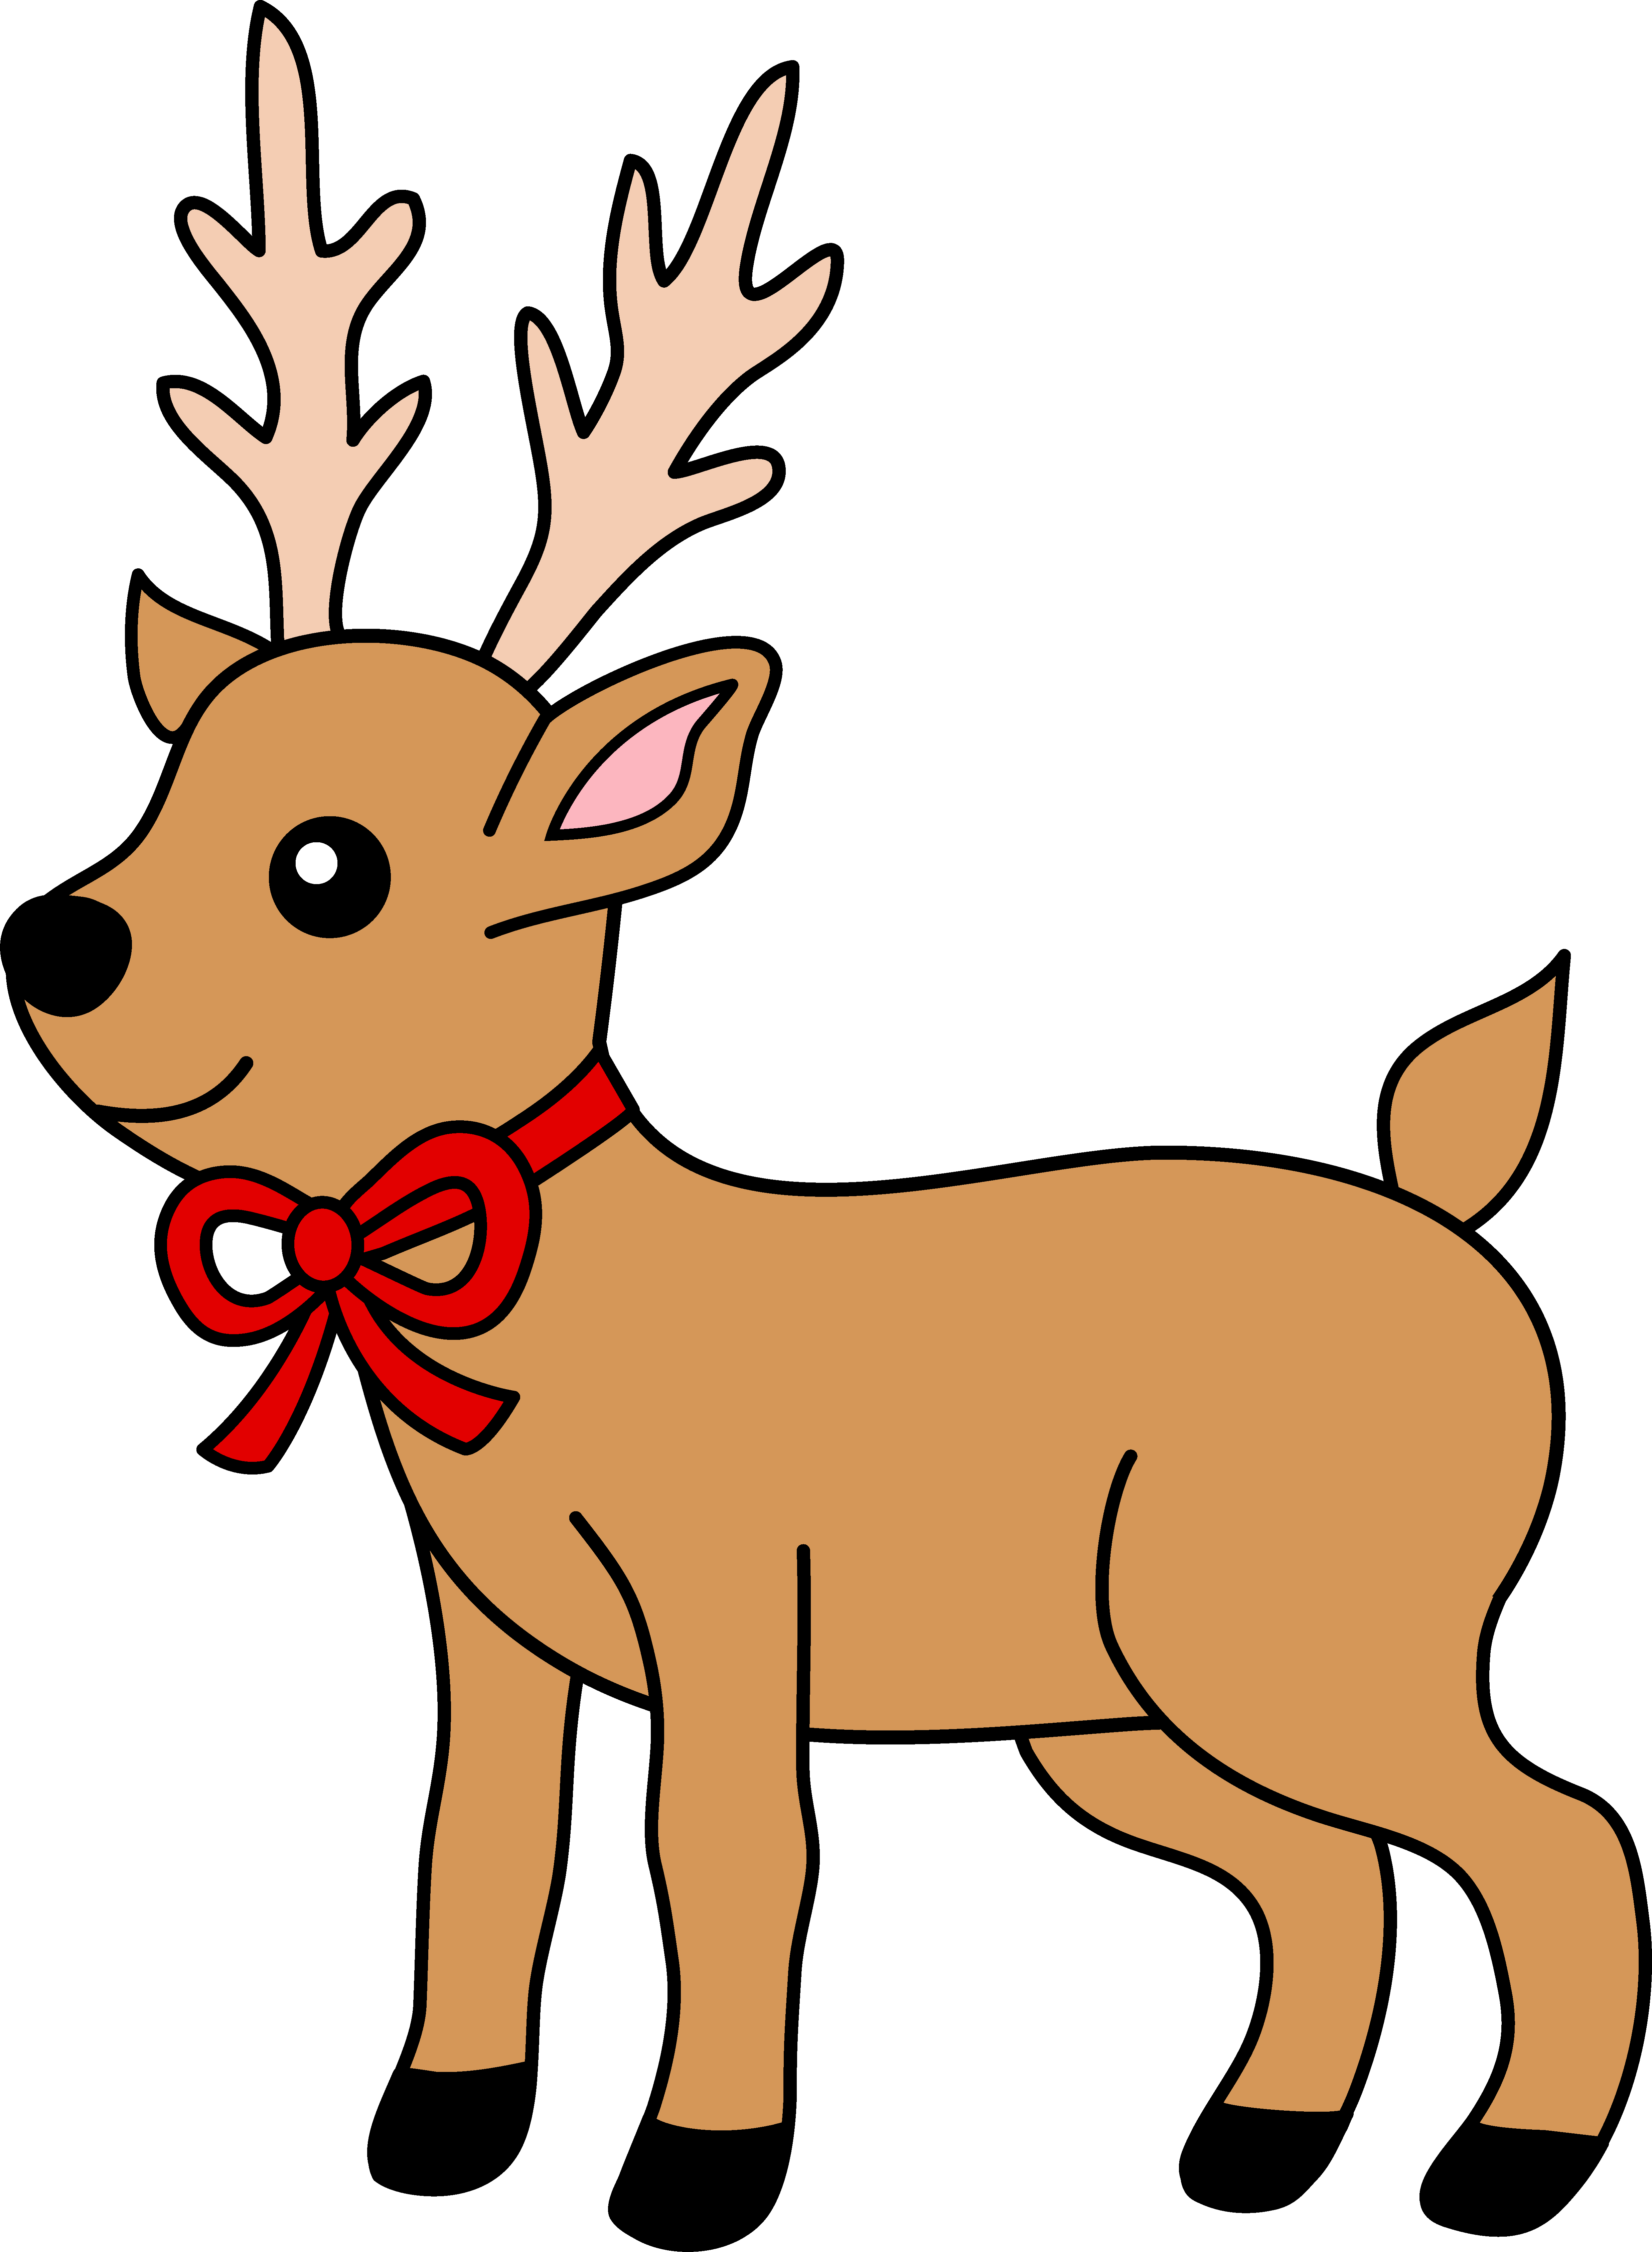 Free clipart reindeer images